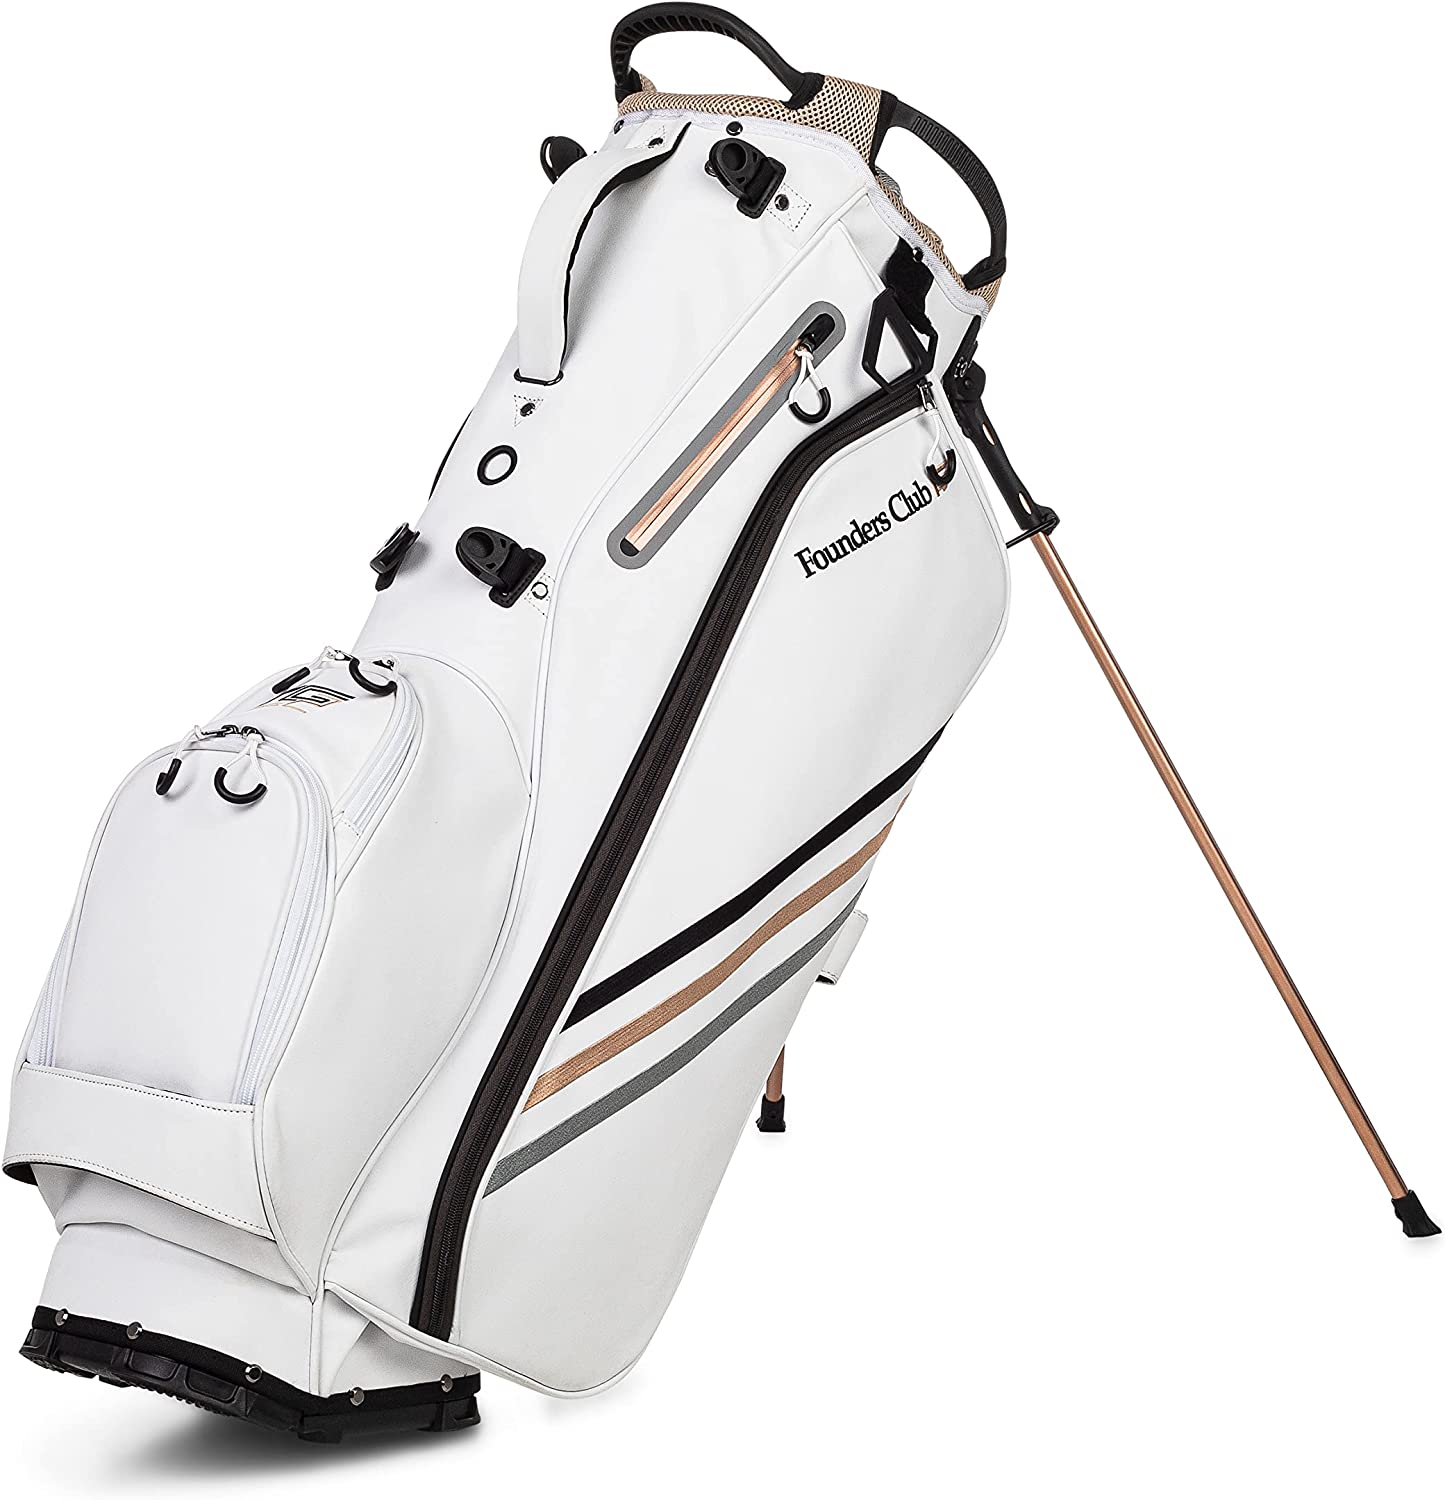 Founders Club Golf TG2 Stand Bag